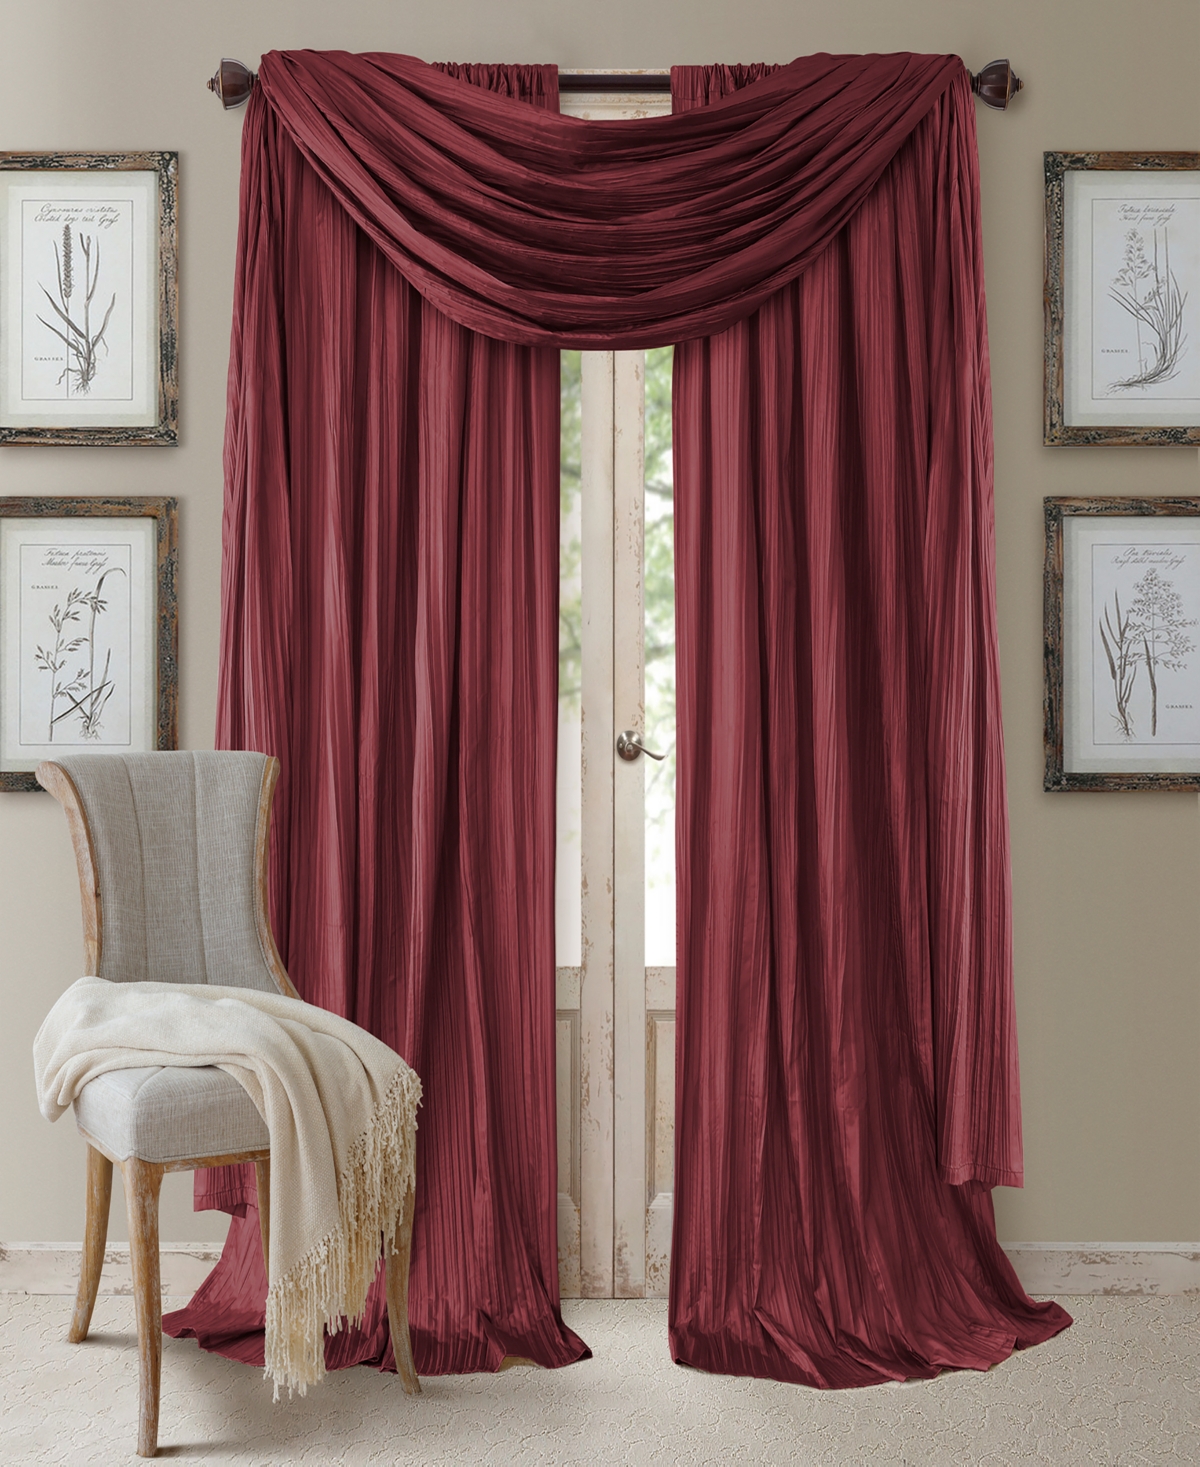 Athena Rod Pocket 52" x 84" Pair of Curtain Panels with Scarf Valance, Set of 3 - White